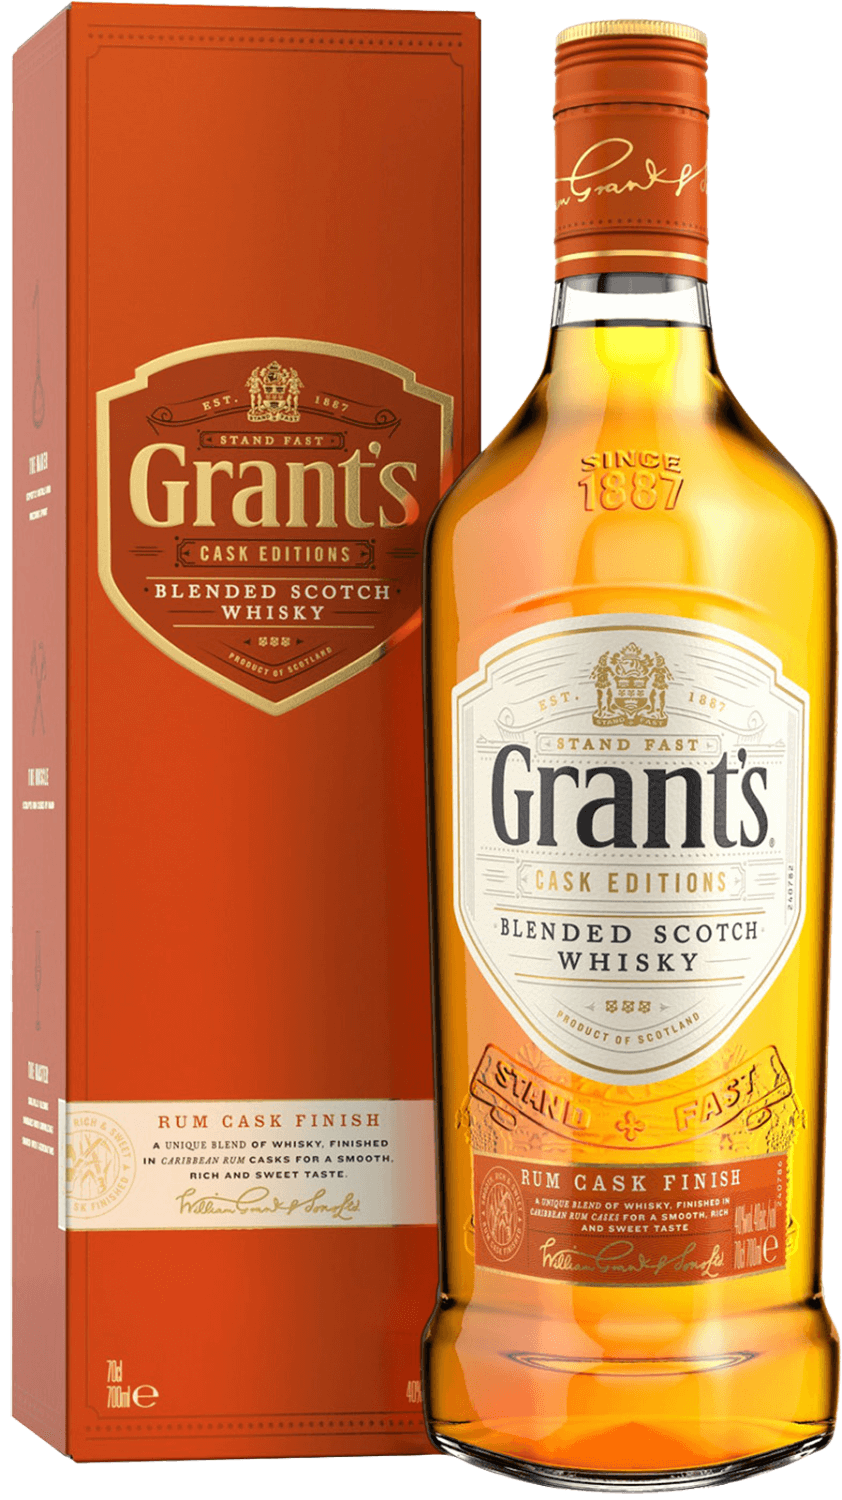 Grant's Ale Cask Finish Blended Scotch Whisky (gift box) angus dundee cask strength blended grain scotch whisky 50 y o gift box